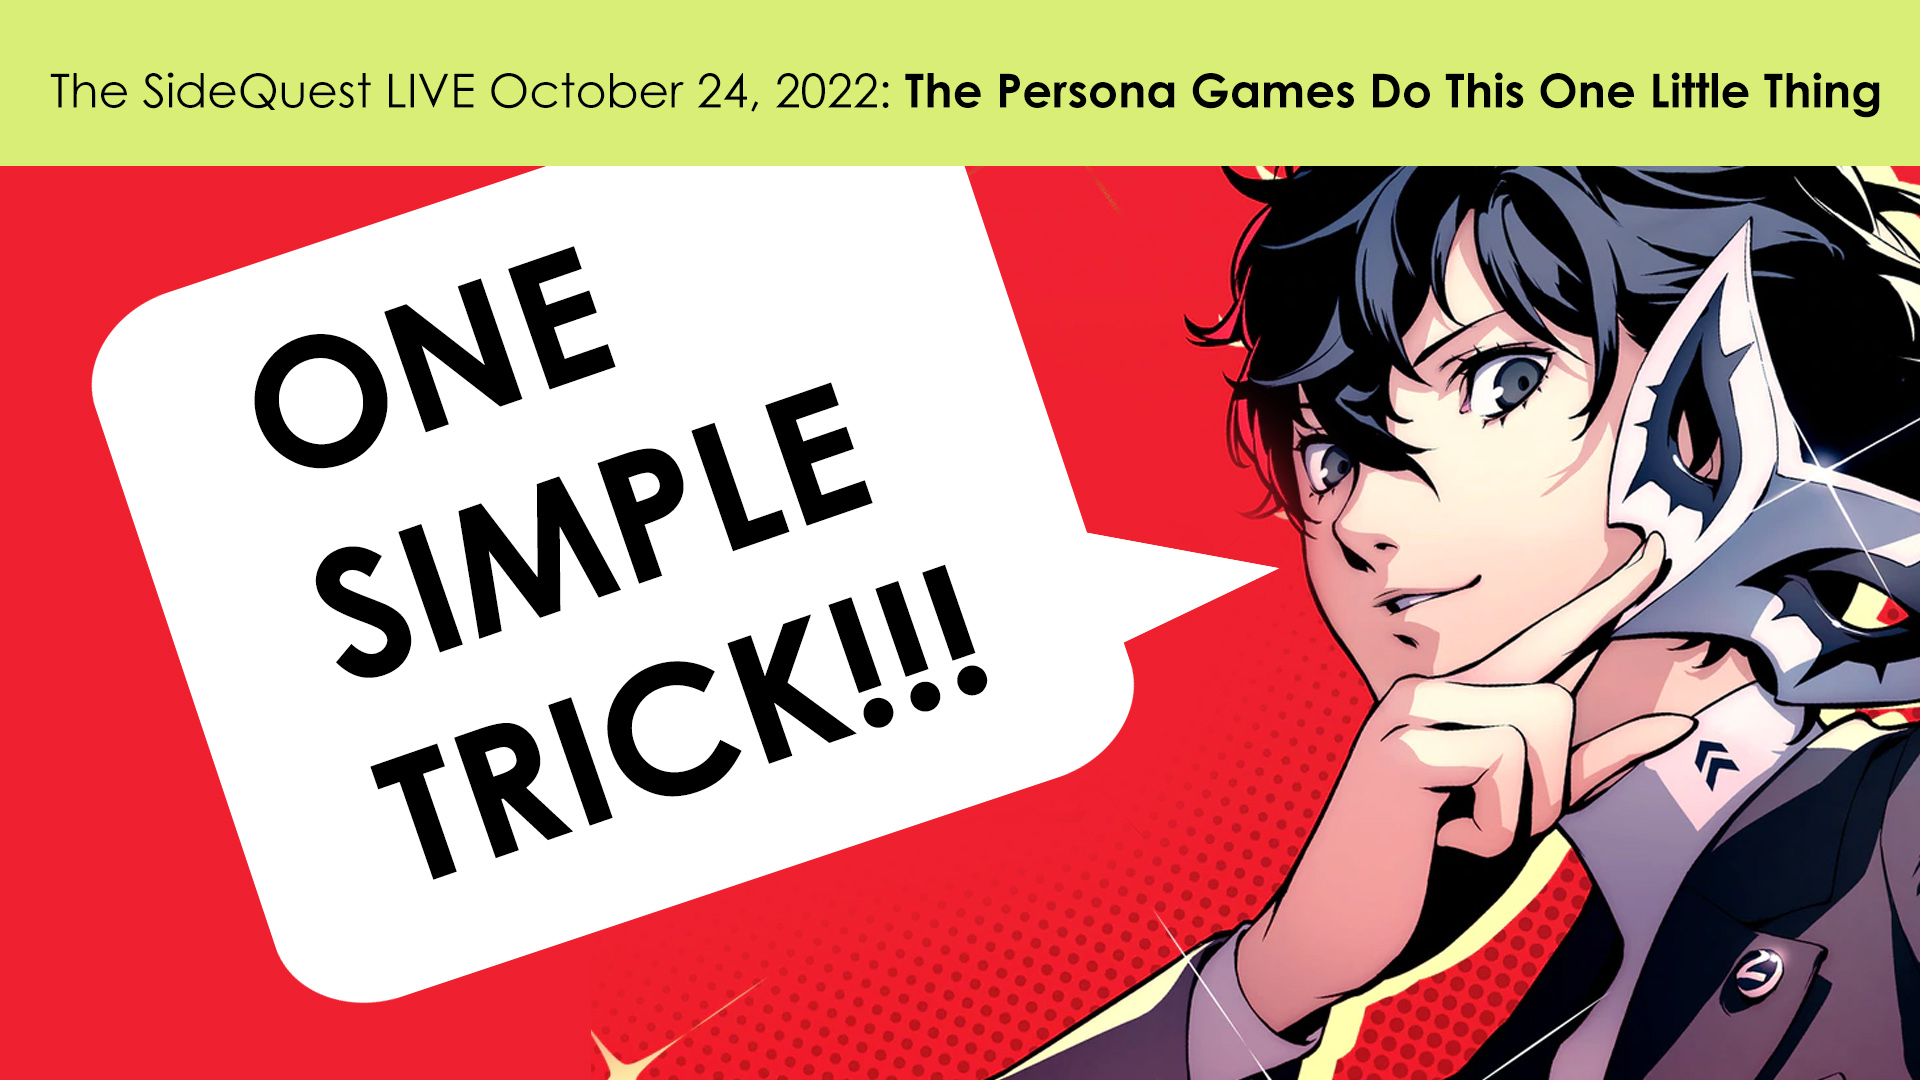 The SideQuest LIVE October 24, 2022: The Persona Games Do This One Little Thing